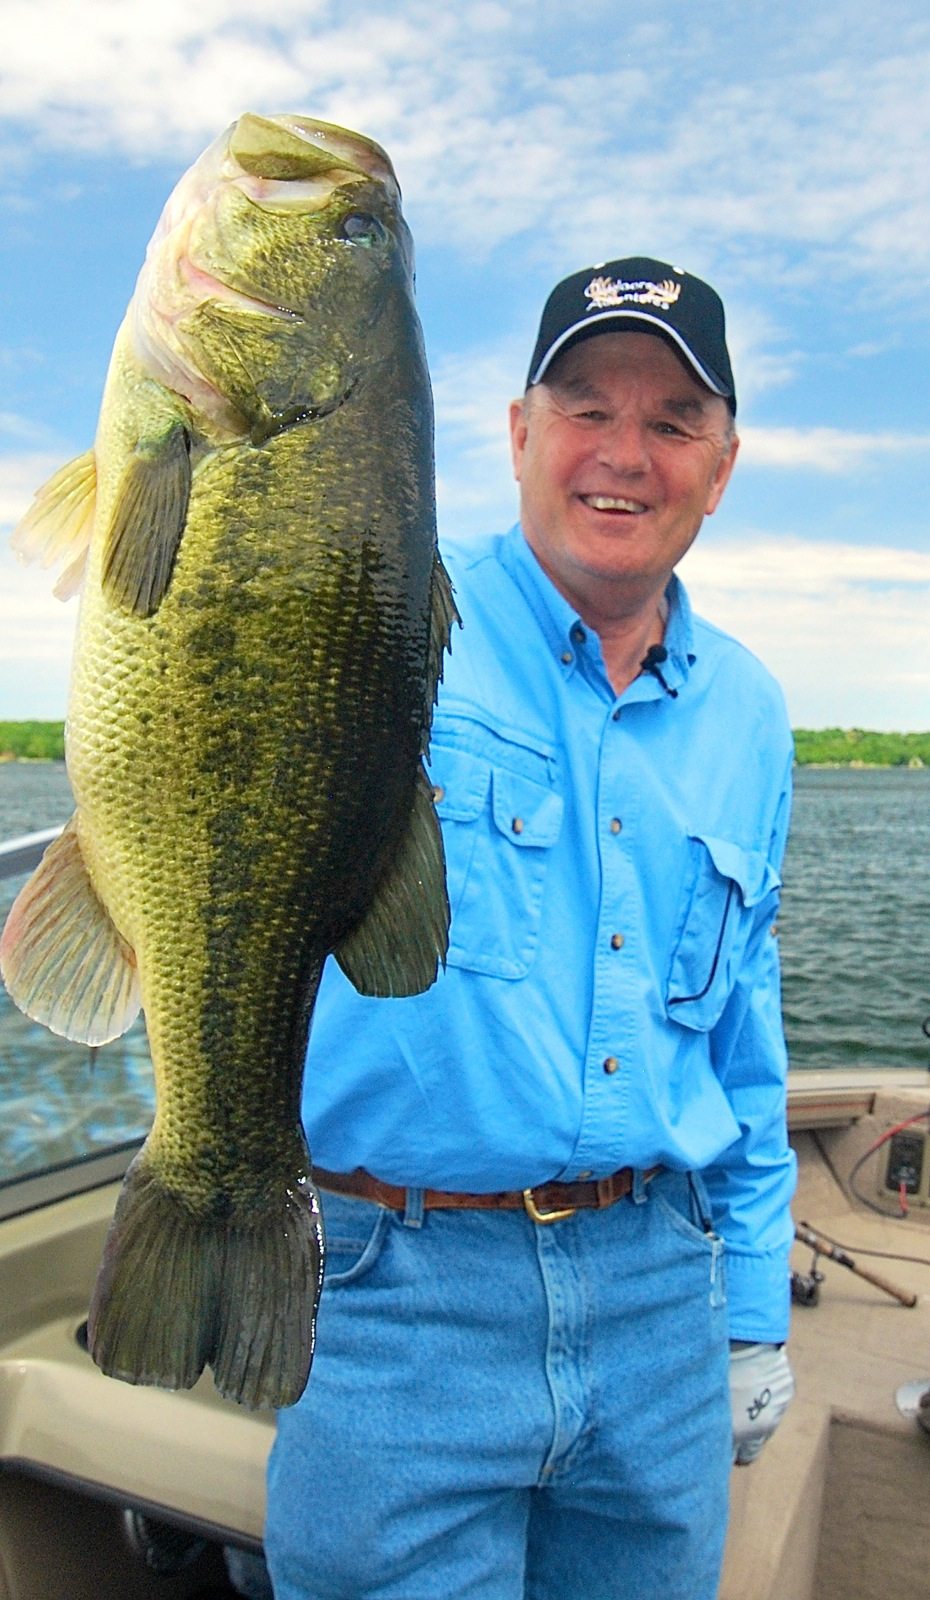 Gary's National Freshwater Fishing induction into the 2017 Hall of Fame Photo